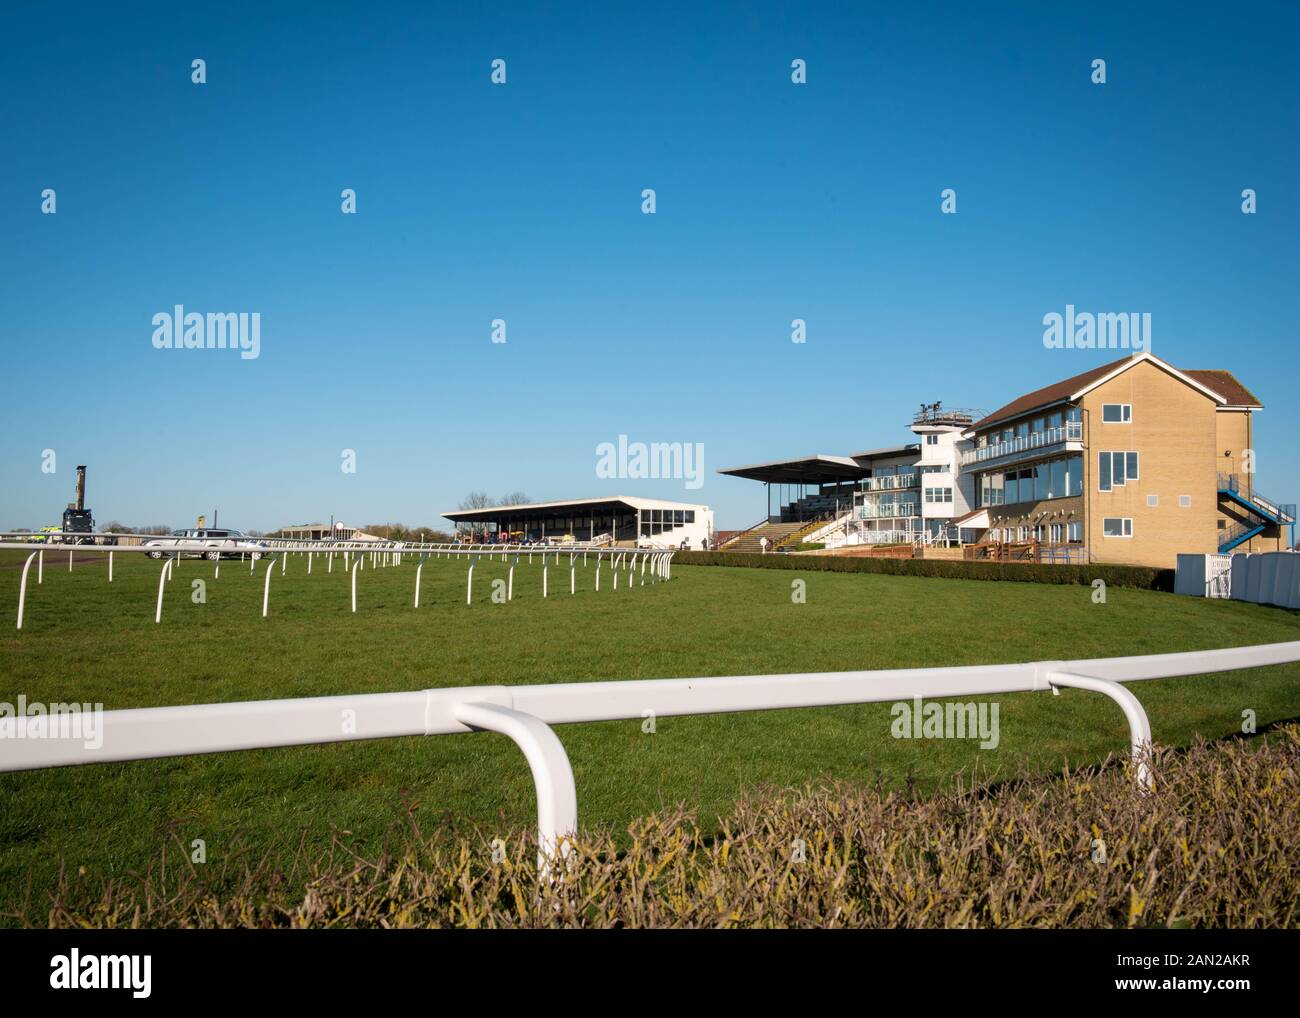 View of Wincanton Racecourse in Somerset, England on a clear day Stock Photo